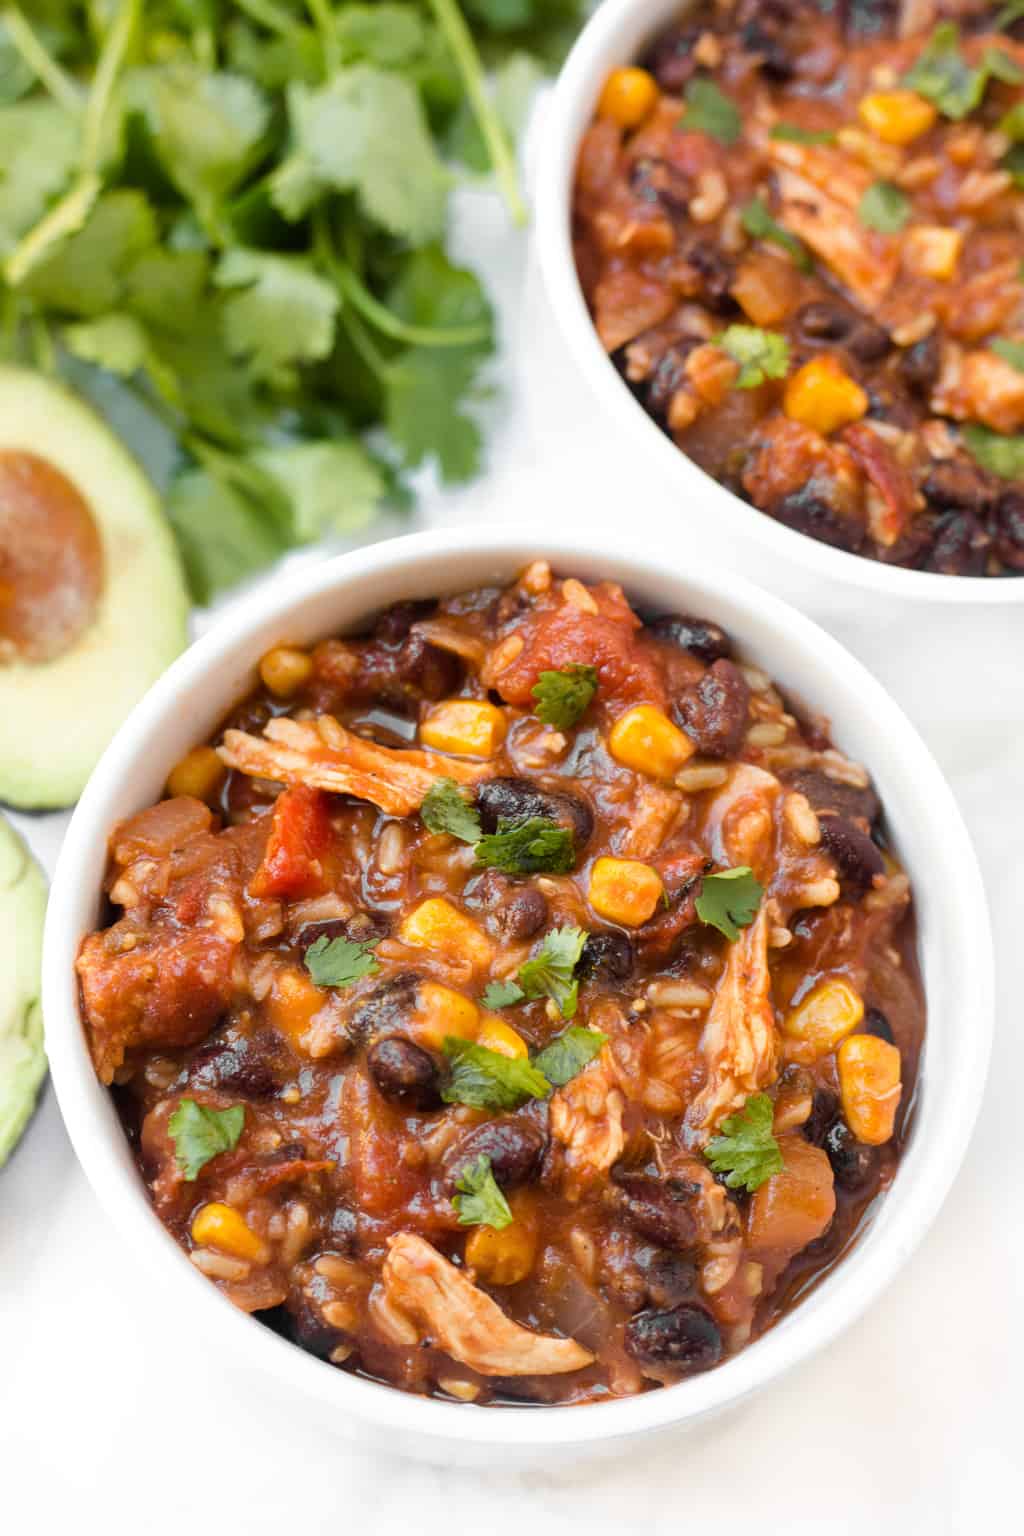 10 simple, healthy Mexican recipes that are DELICIOUS like this Chicken Enchilada Soup